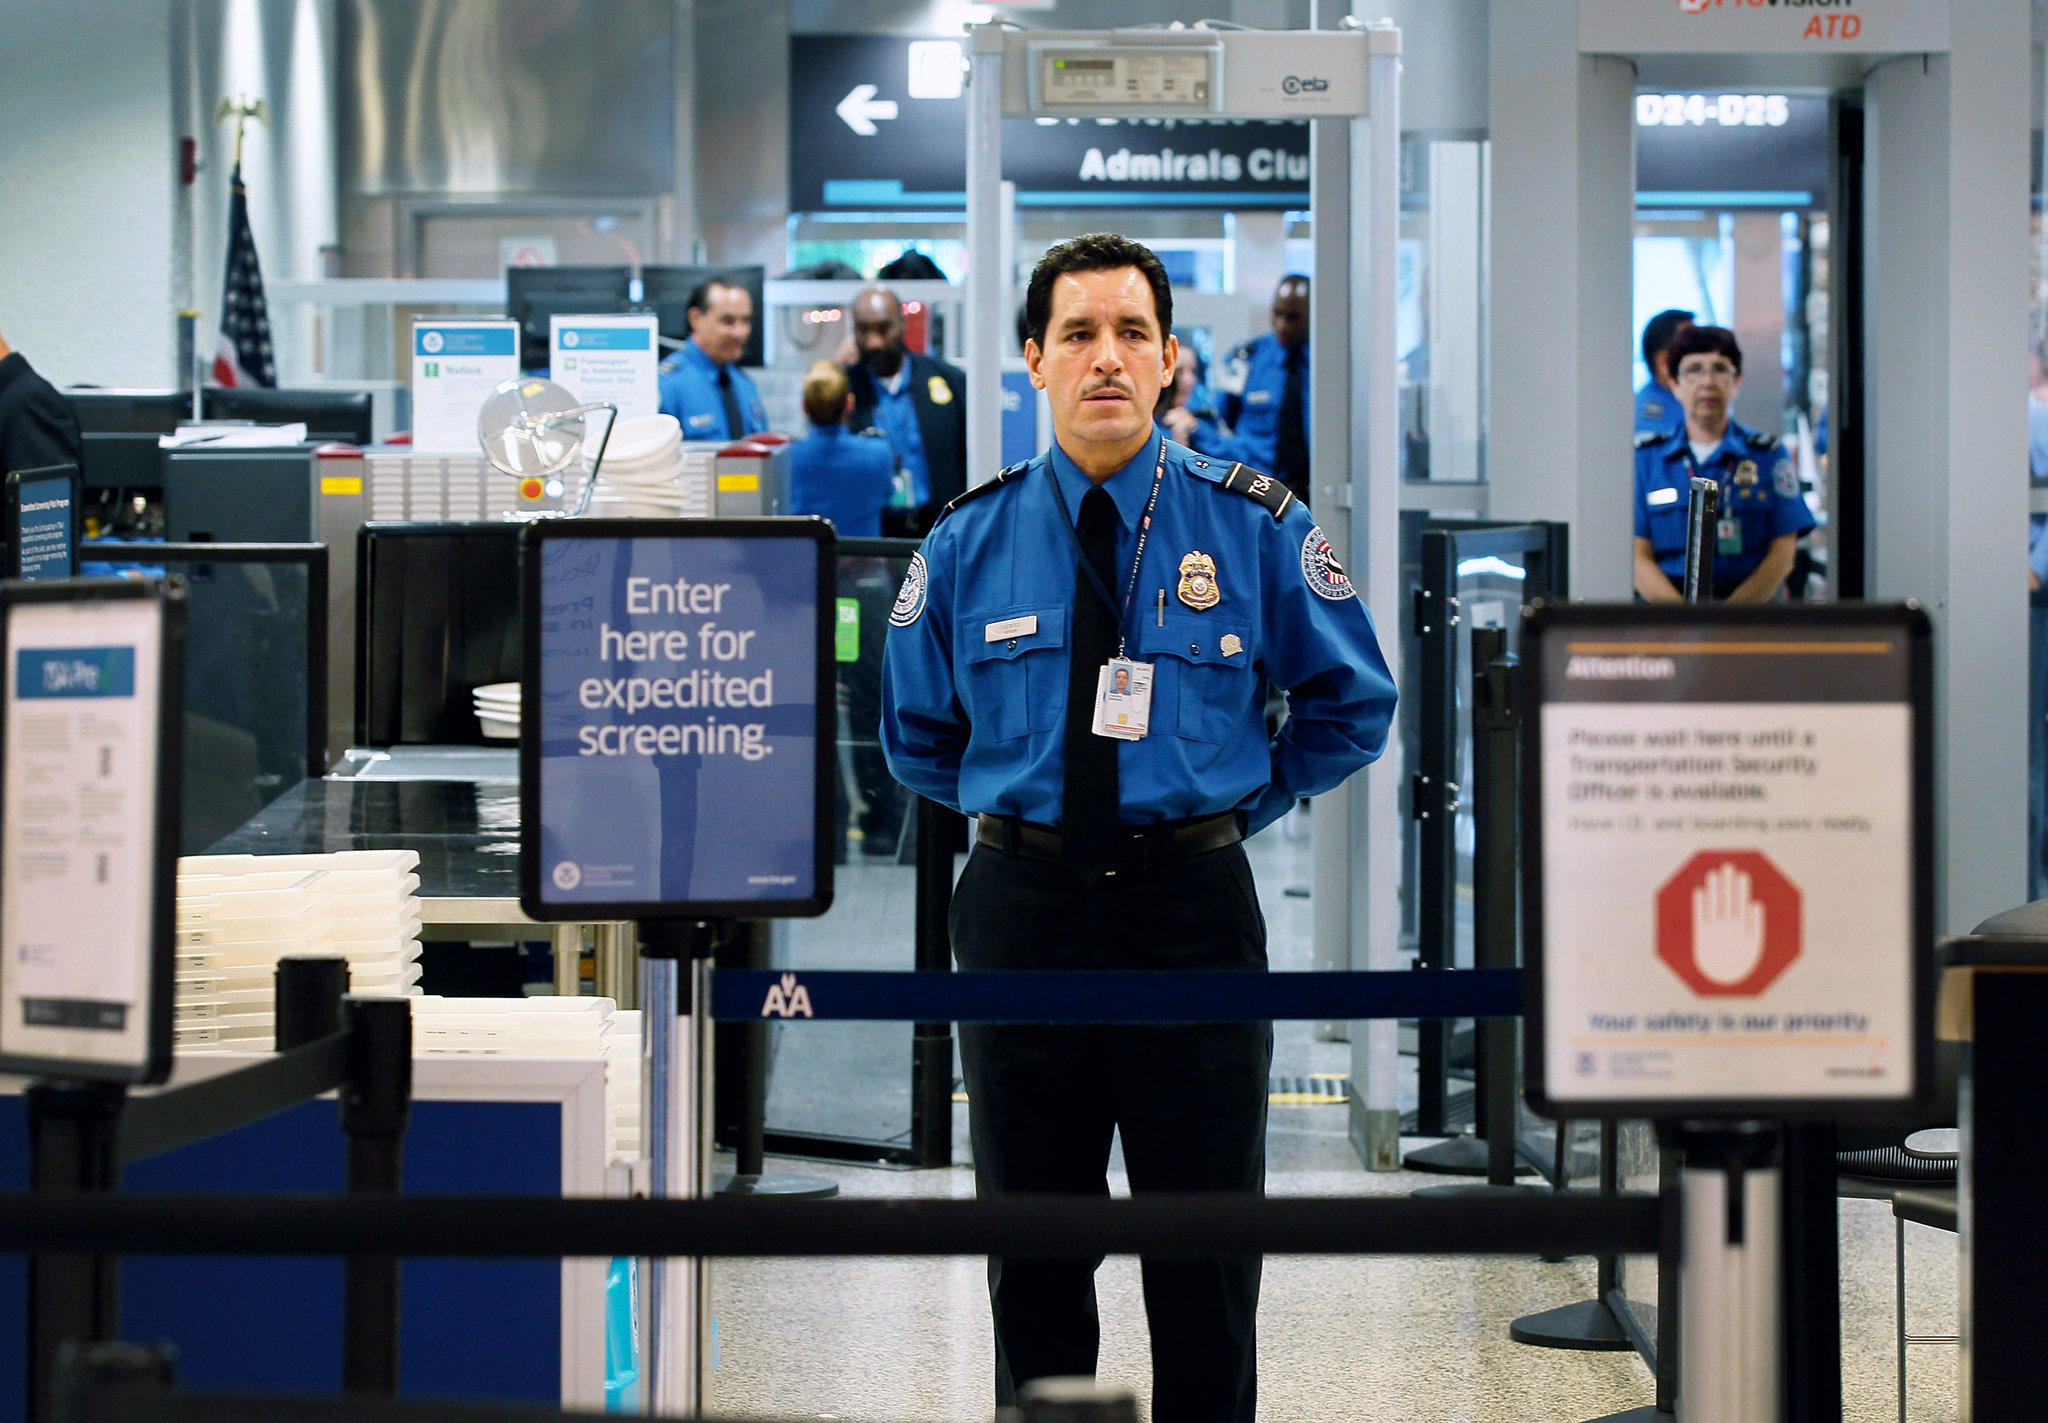  Airports have to employ a large number of people to carry out security measures